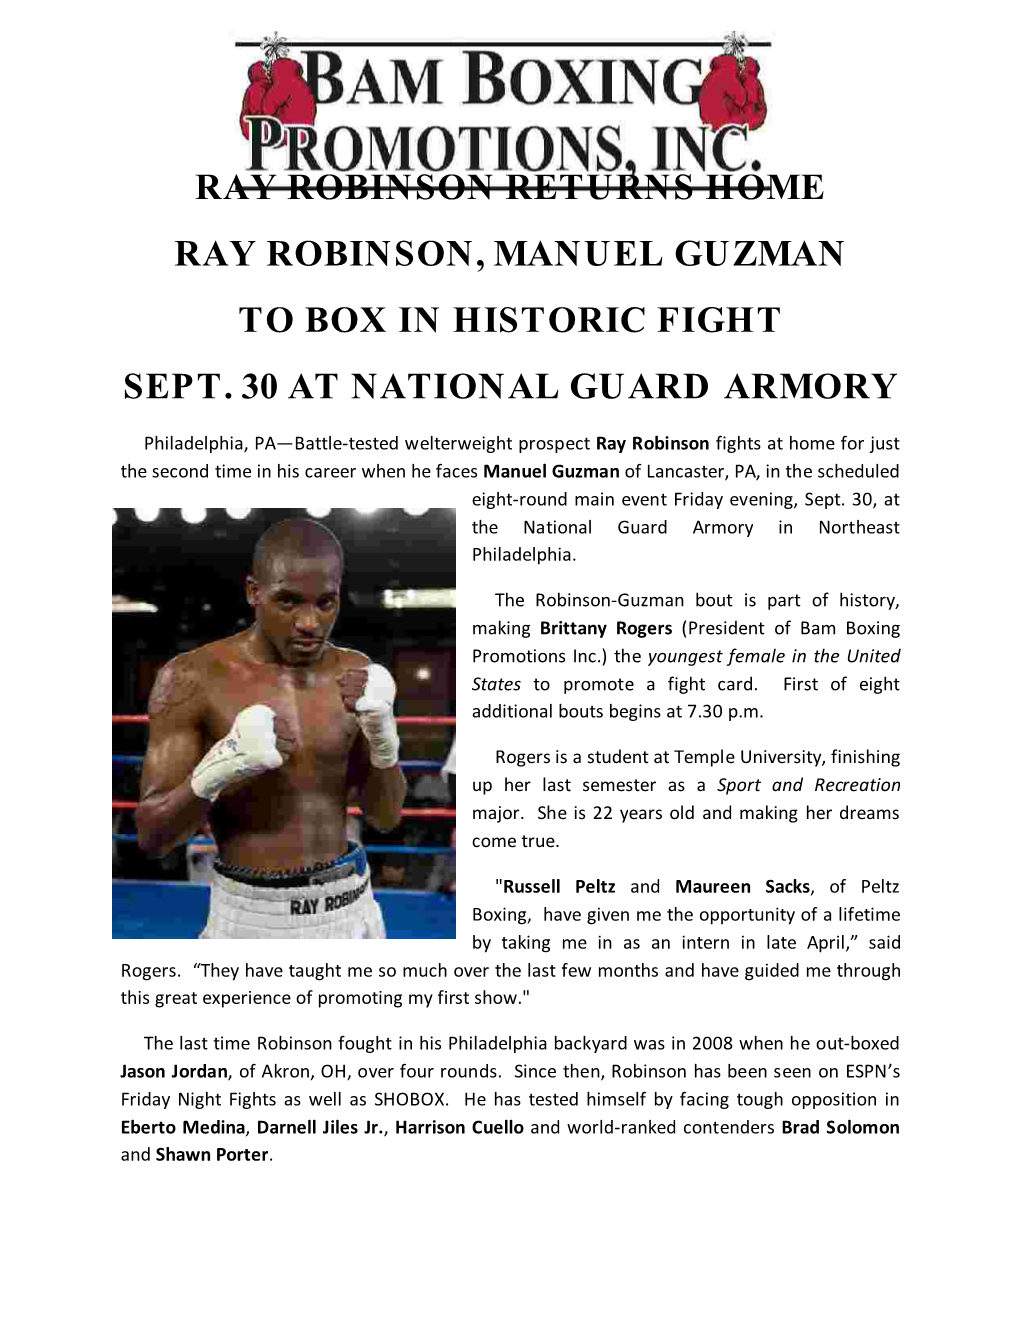 Historic Fight Sept. 30 at National Guard Armory